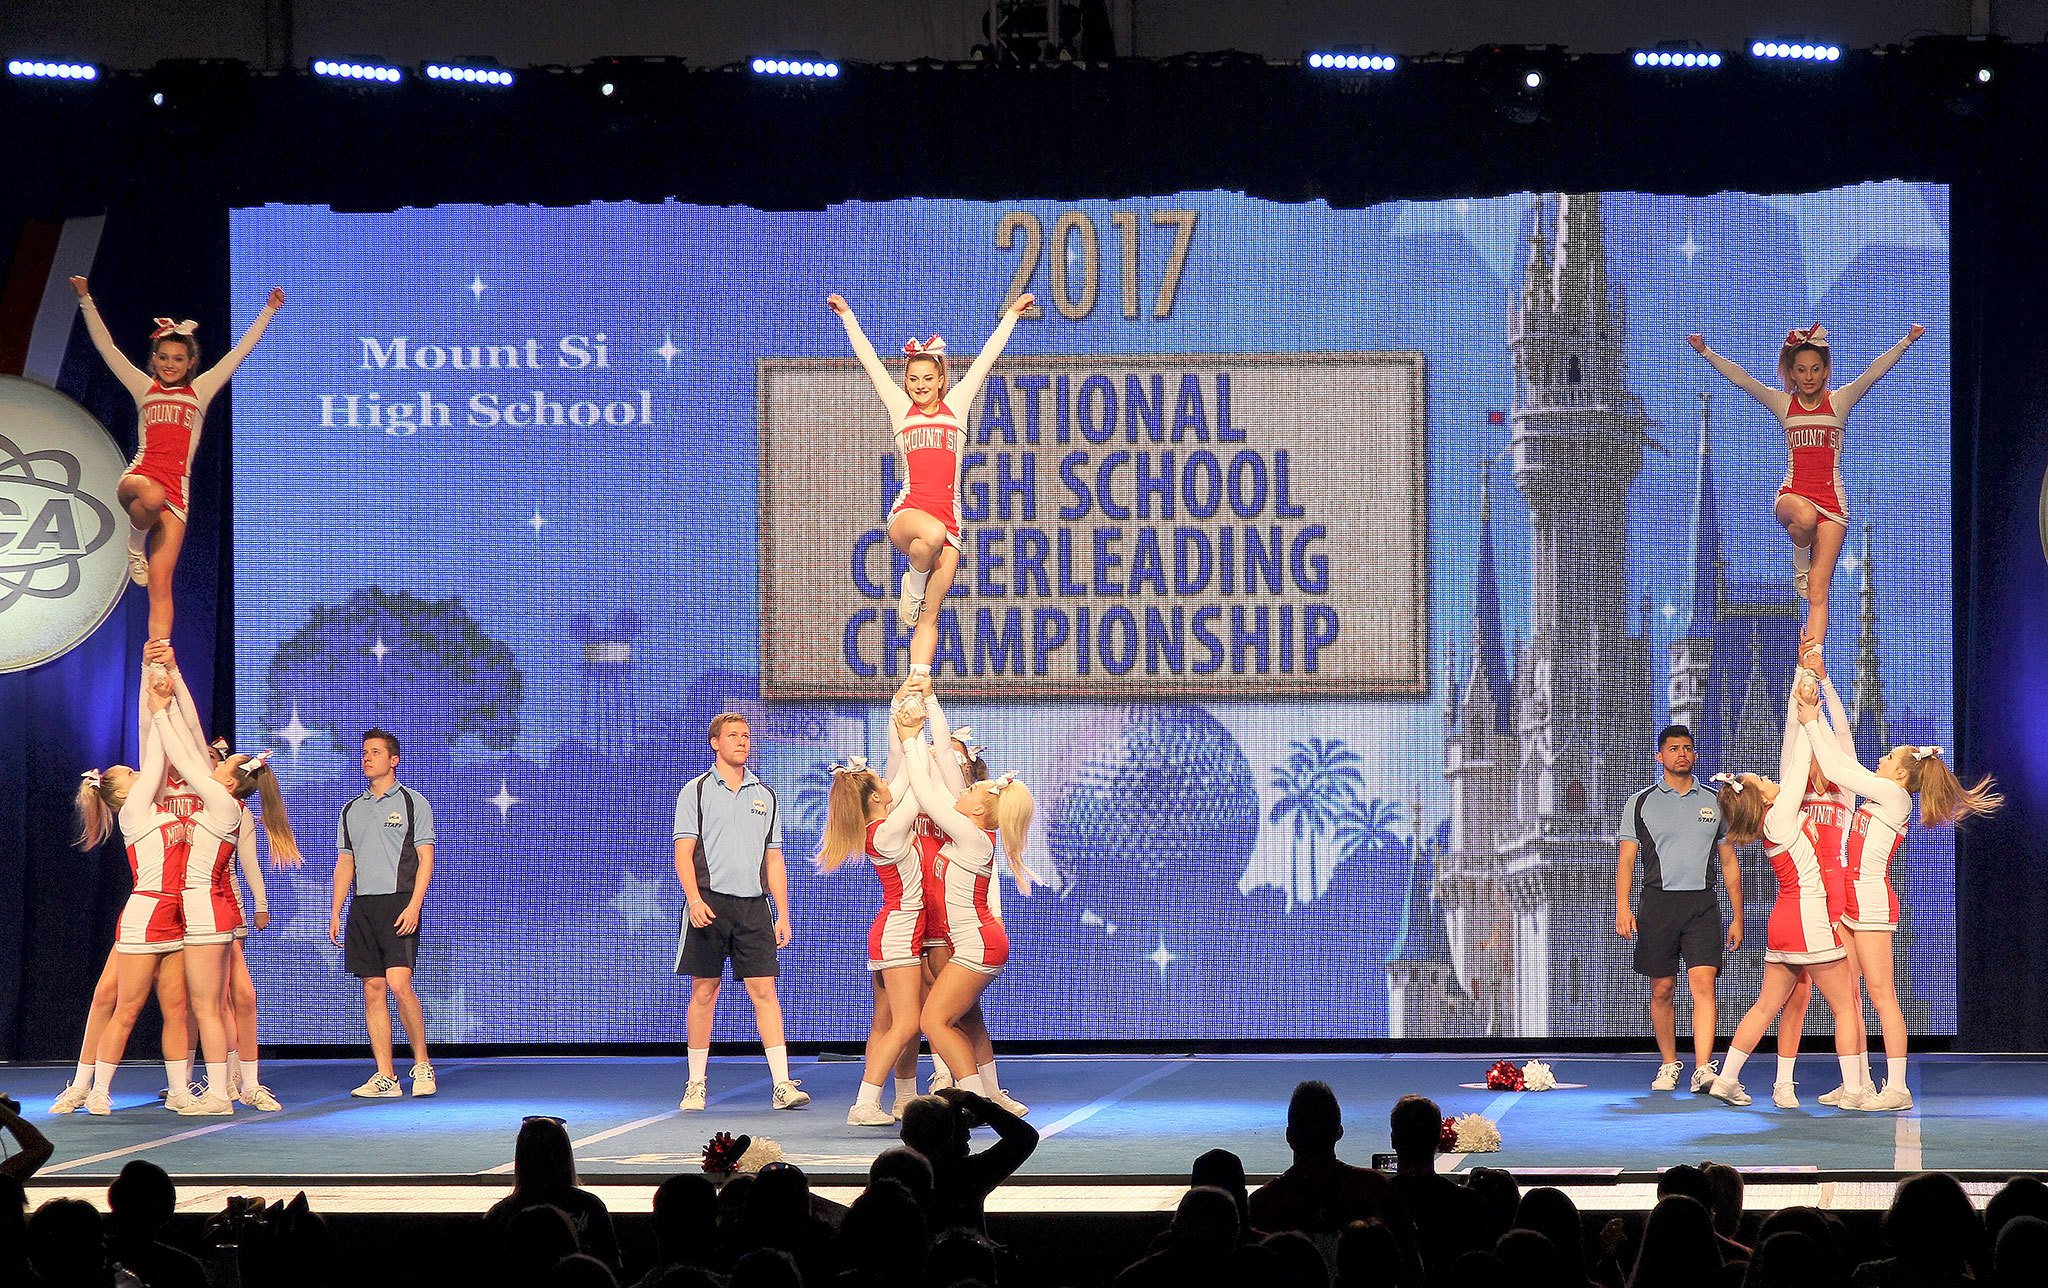 Competing at the National High School Cheerleading Competition Feb. 10 and 11, the Mount Si High School Red squad finished 8th overall. Courtesy Photo